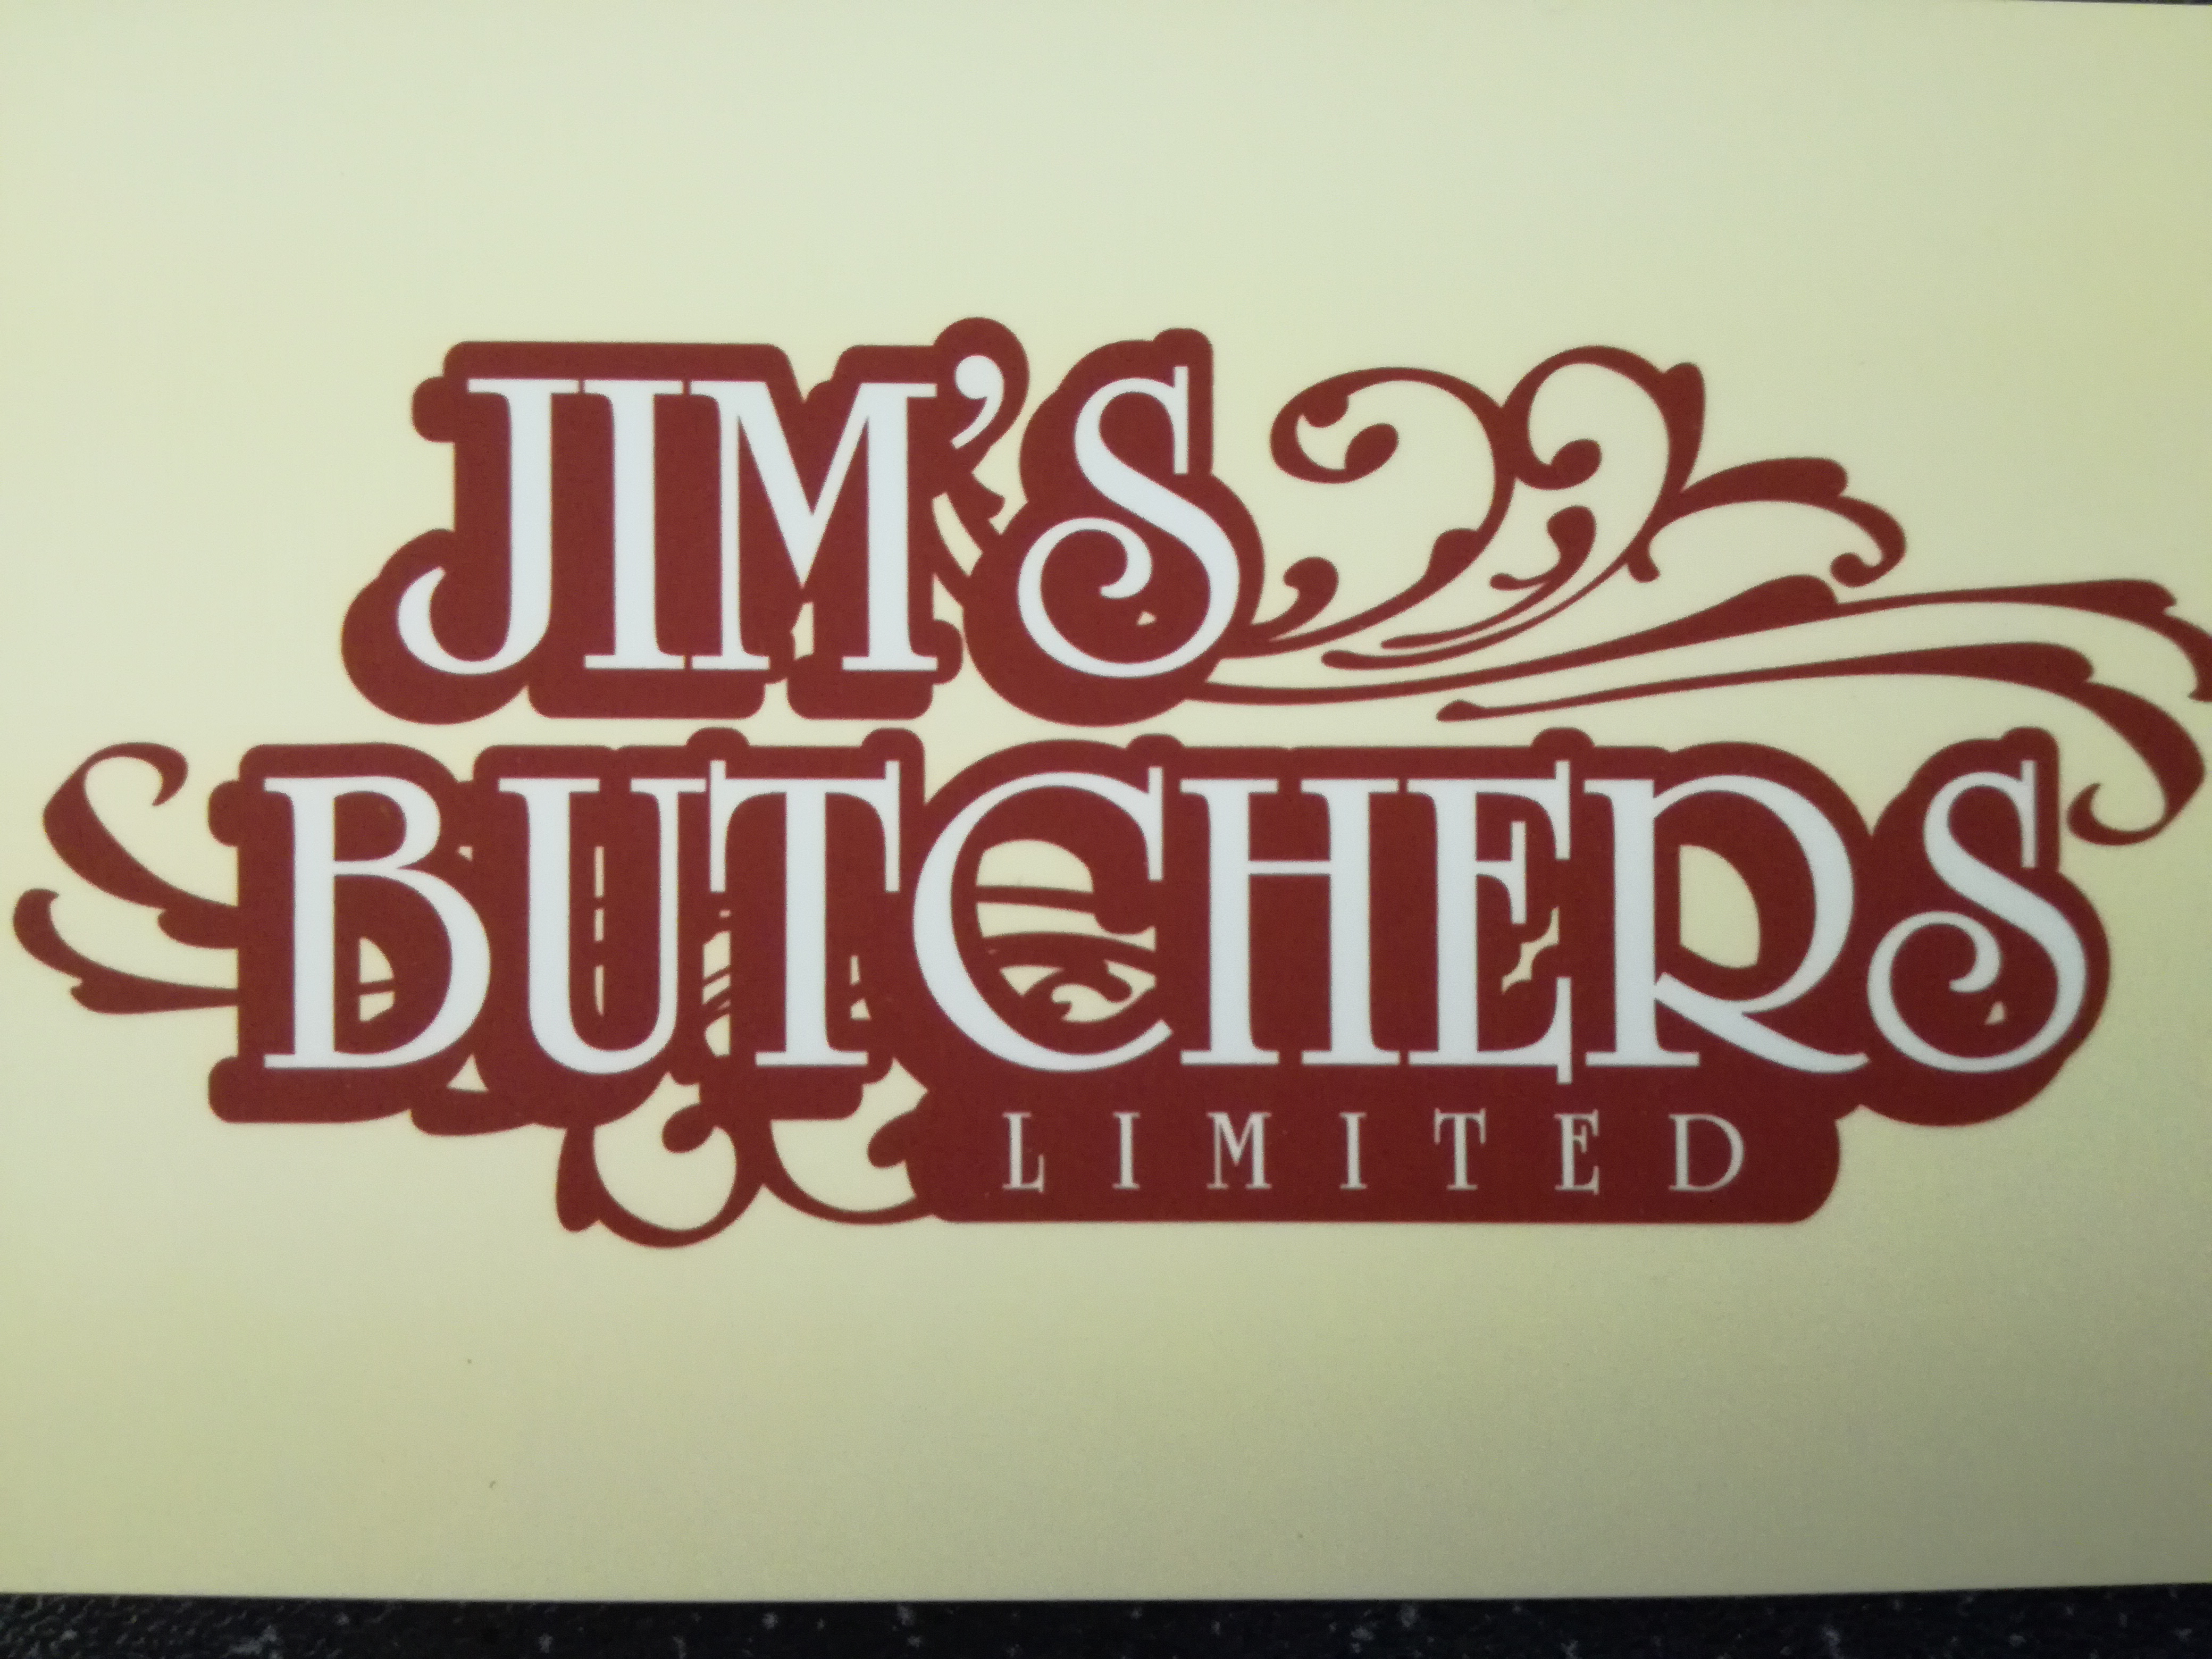 Jim's Butchers is a family owned business that has been based in Great Yarmouth for over 25 years.